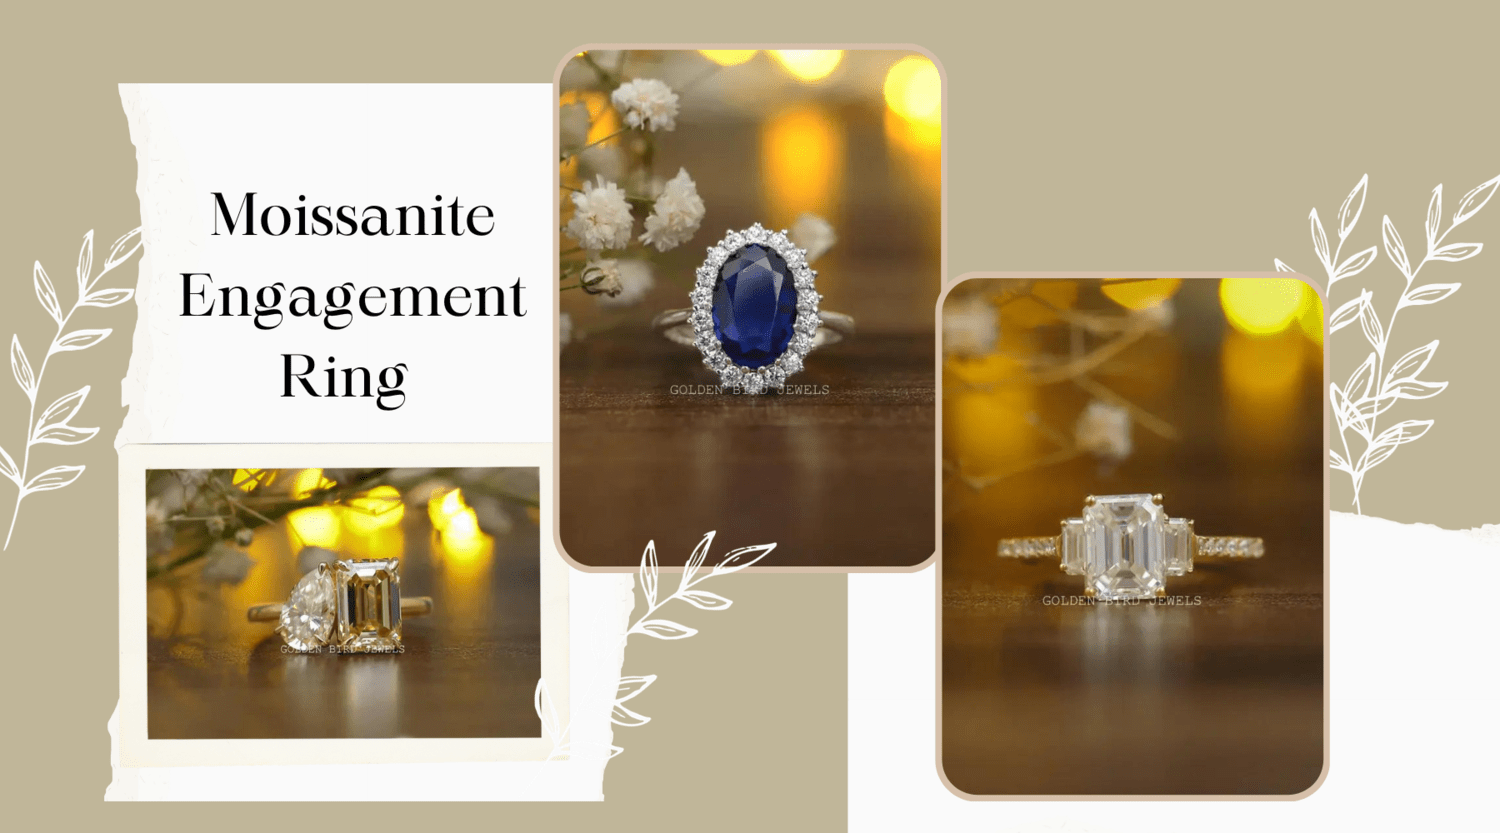 Why you should choose the moissanite engagement ring?